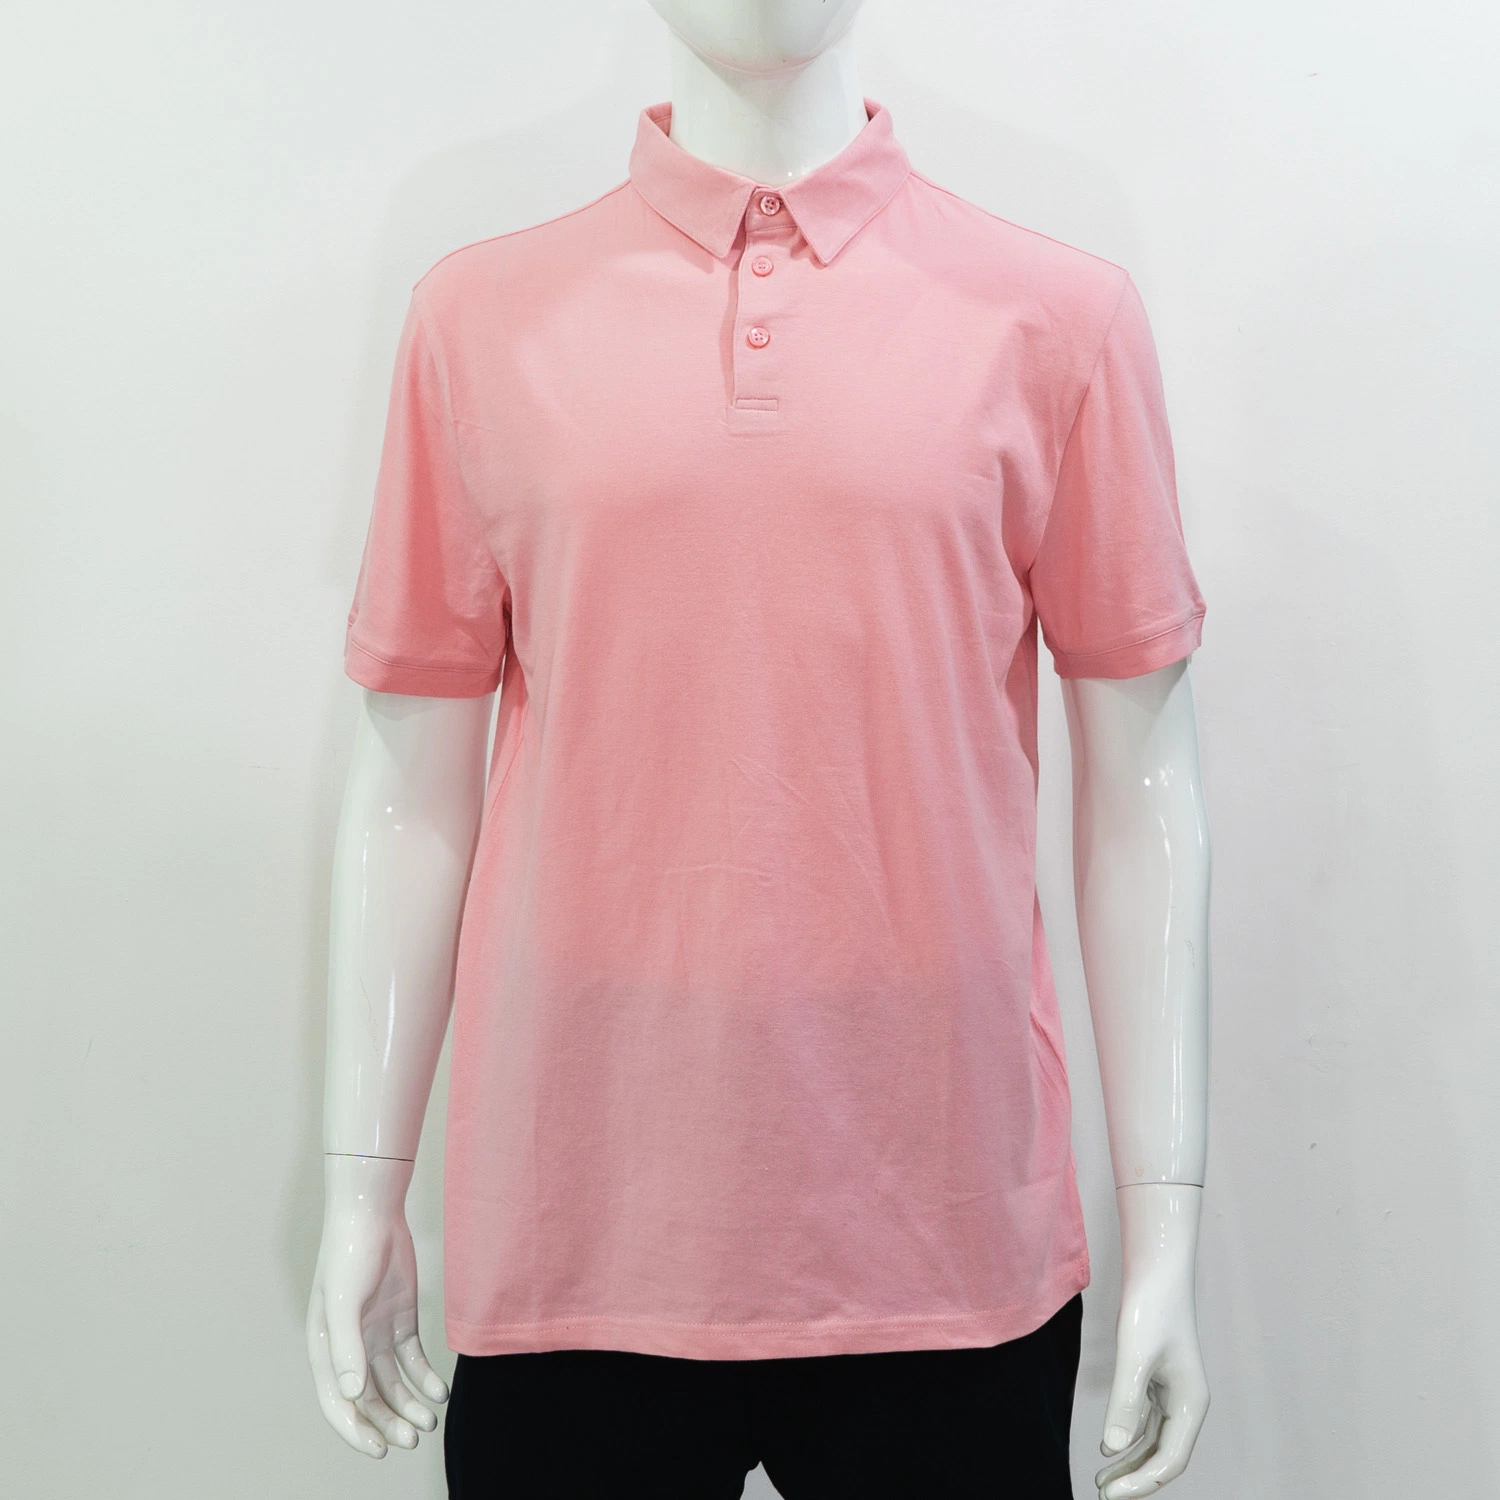 Pink Basic T-Shirt Custom Embroidery Print Short Sleeve Top Wholesale Shirt High Quality Apparel Clothes Mens Casual Cotton Polo